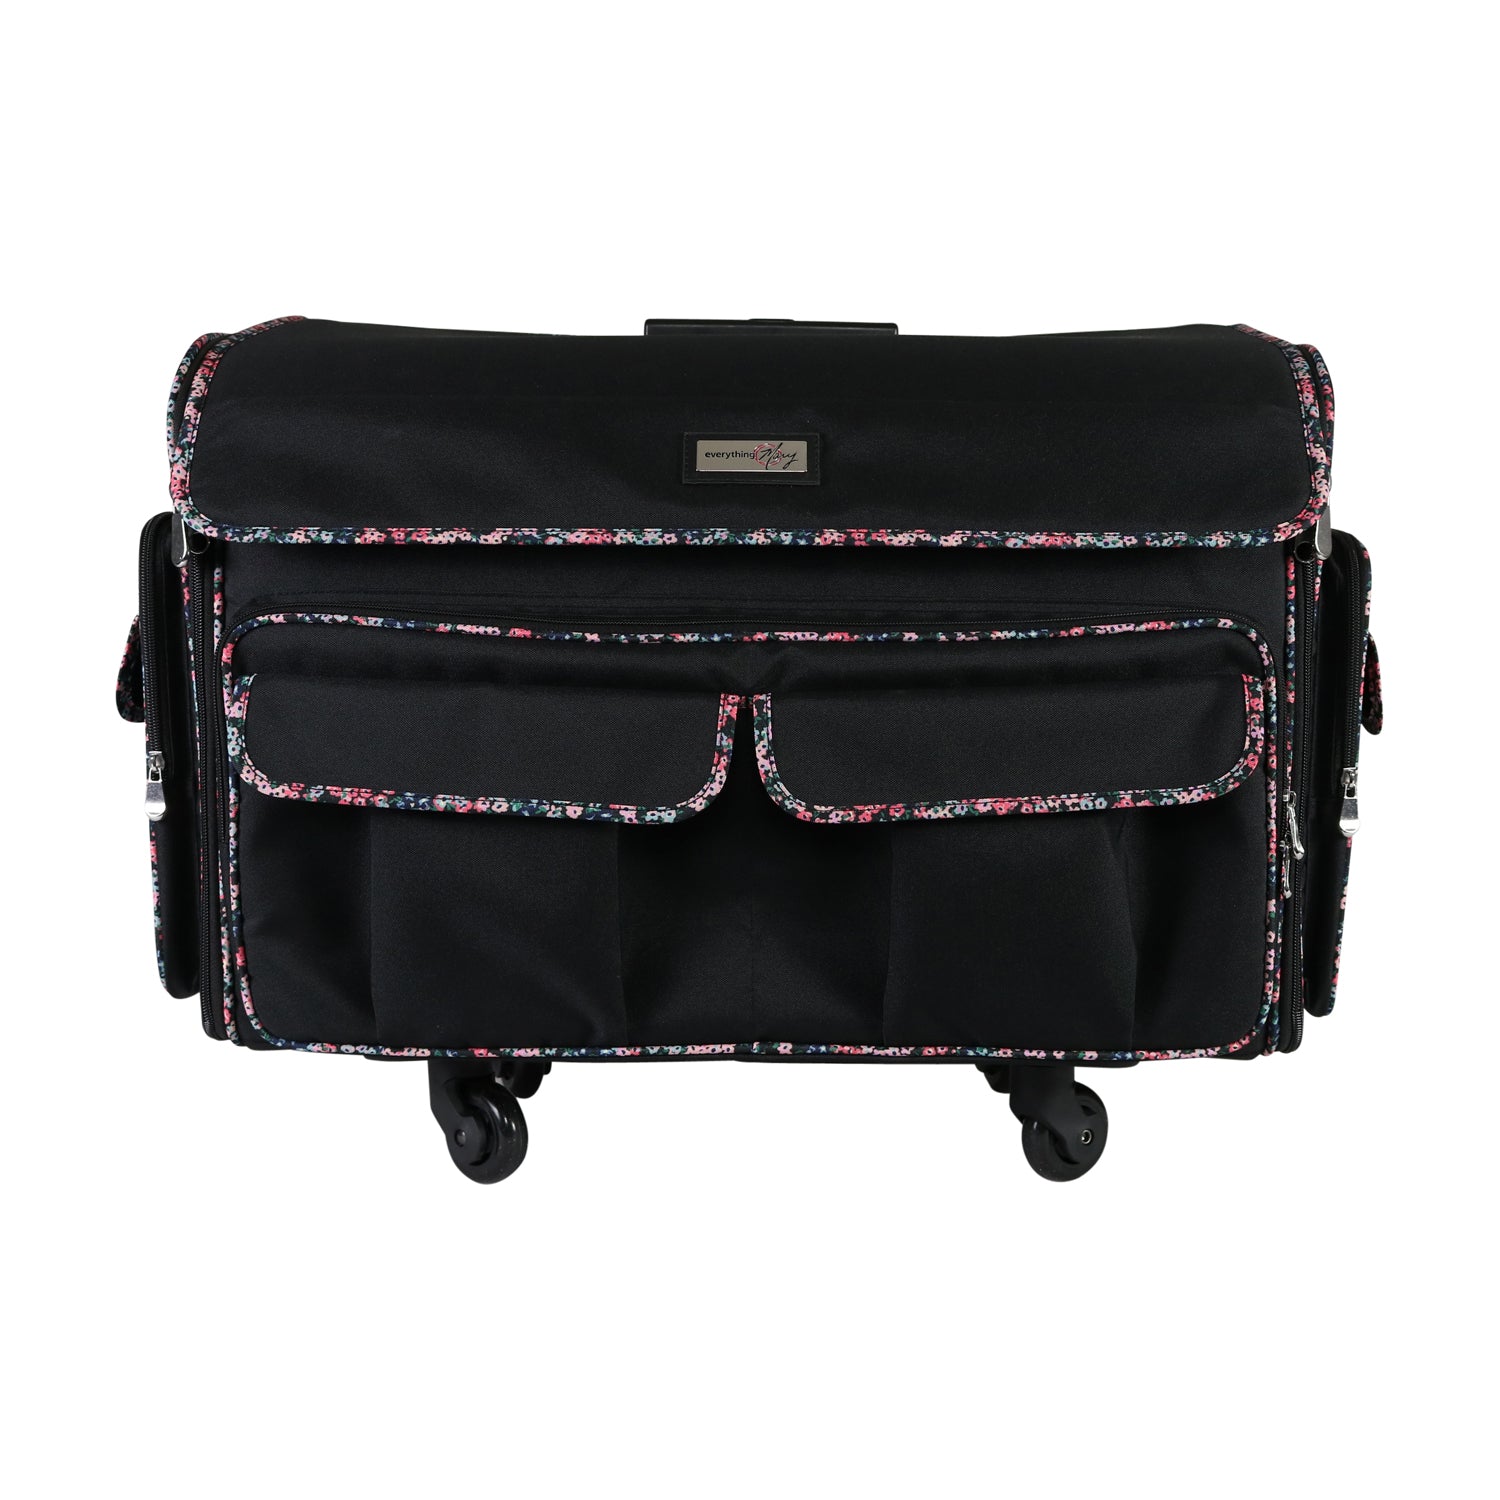 XXL Deluxe Rolling Sewing Machine Case, Black & Floral - Everything Mary